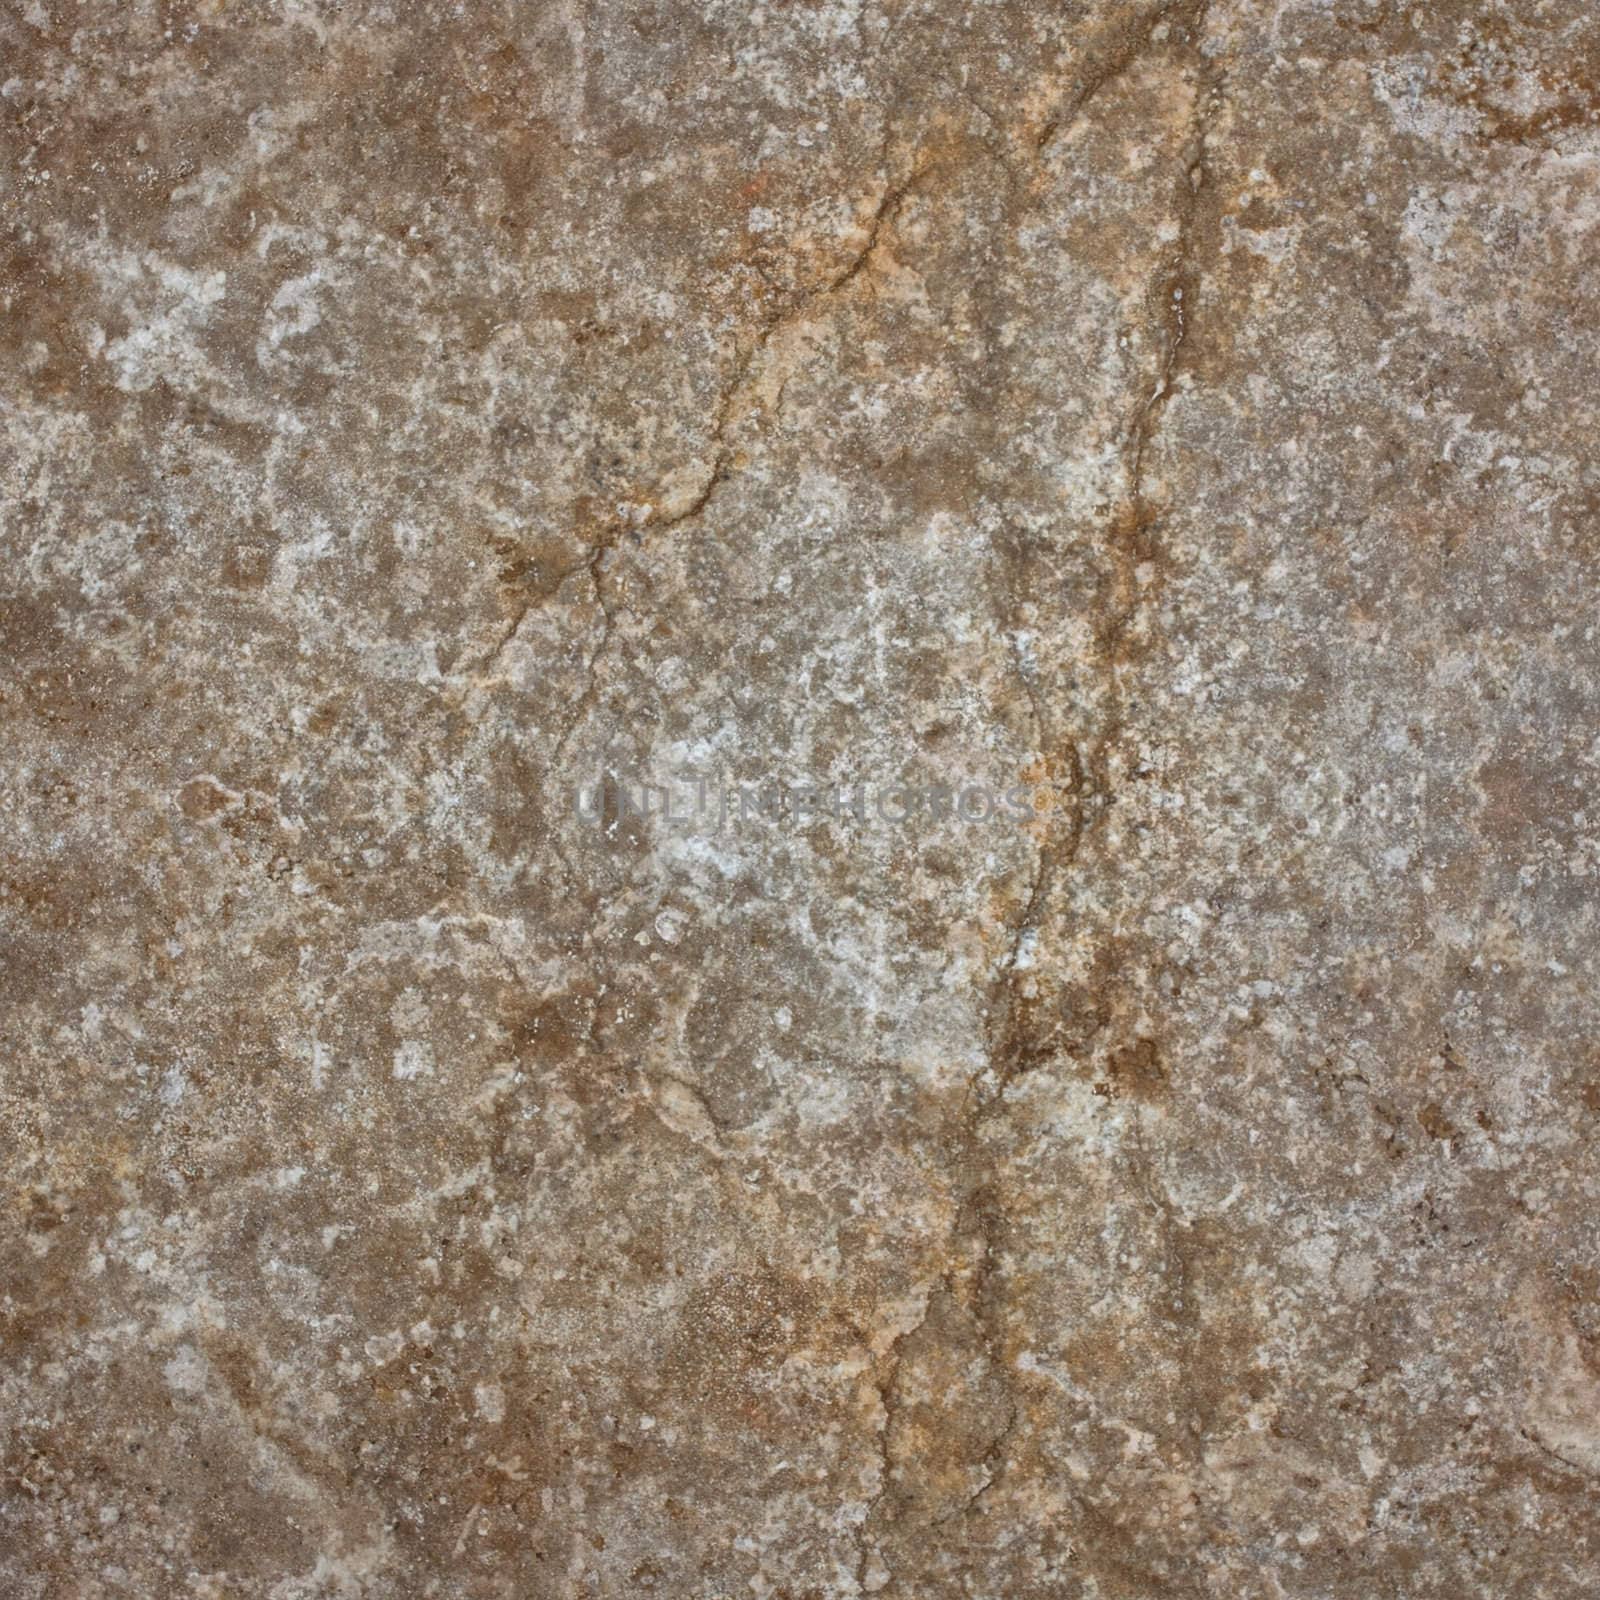 Stone, marble, granite slab surface for decorative textures